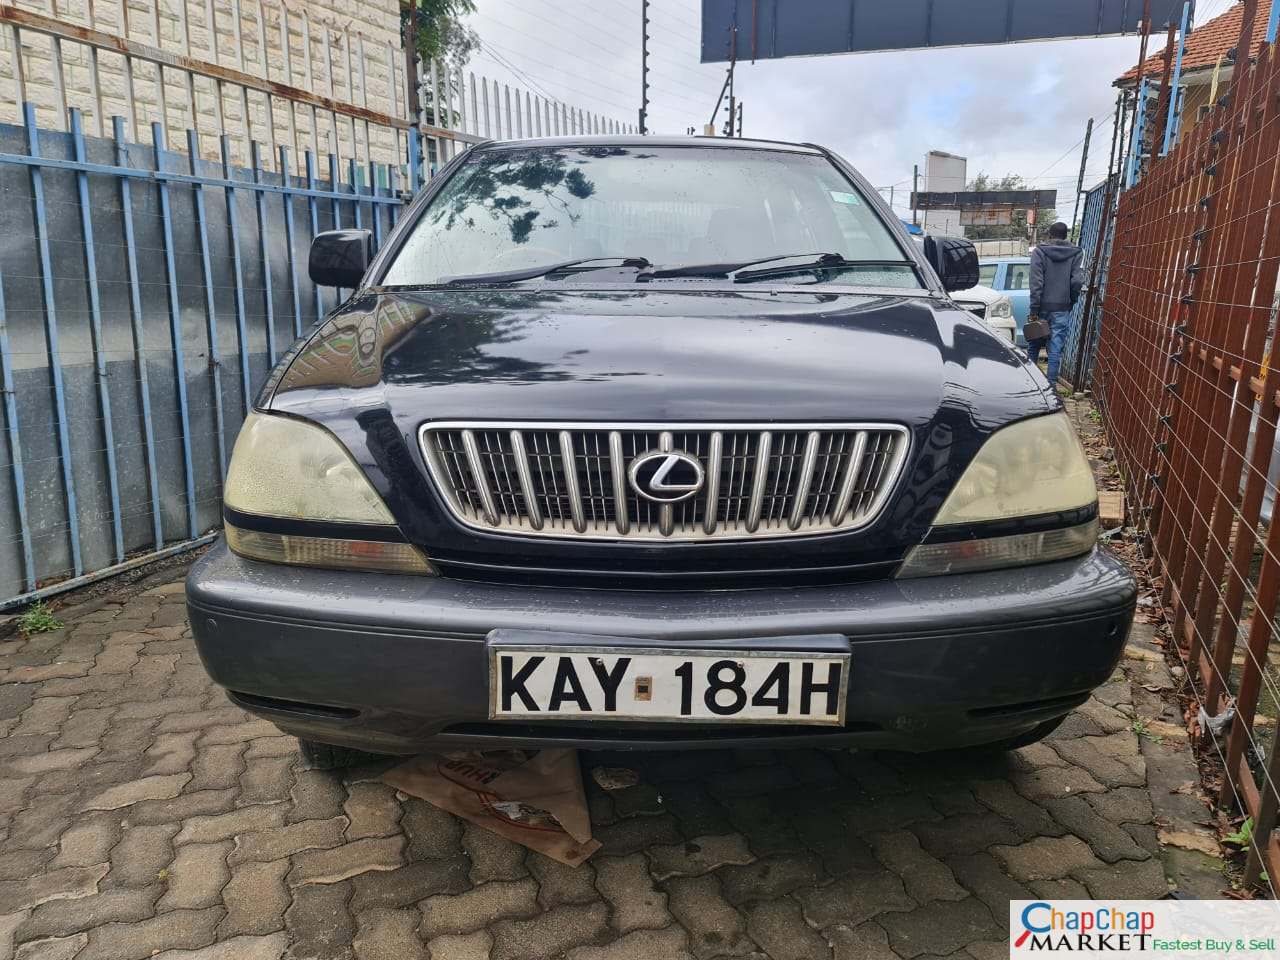 Cars Cars For Sale/Vehicles-LEXUS RX 300 Asian Owner 500k ONLY You Pay 30% Deposit Trade in OK EXCLUSIVE For Sale in Kenya